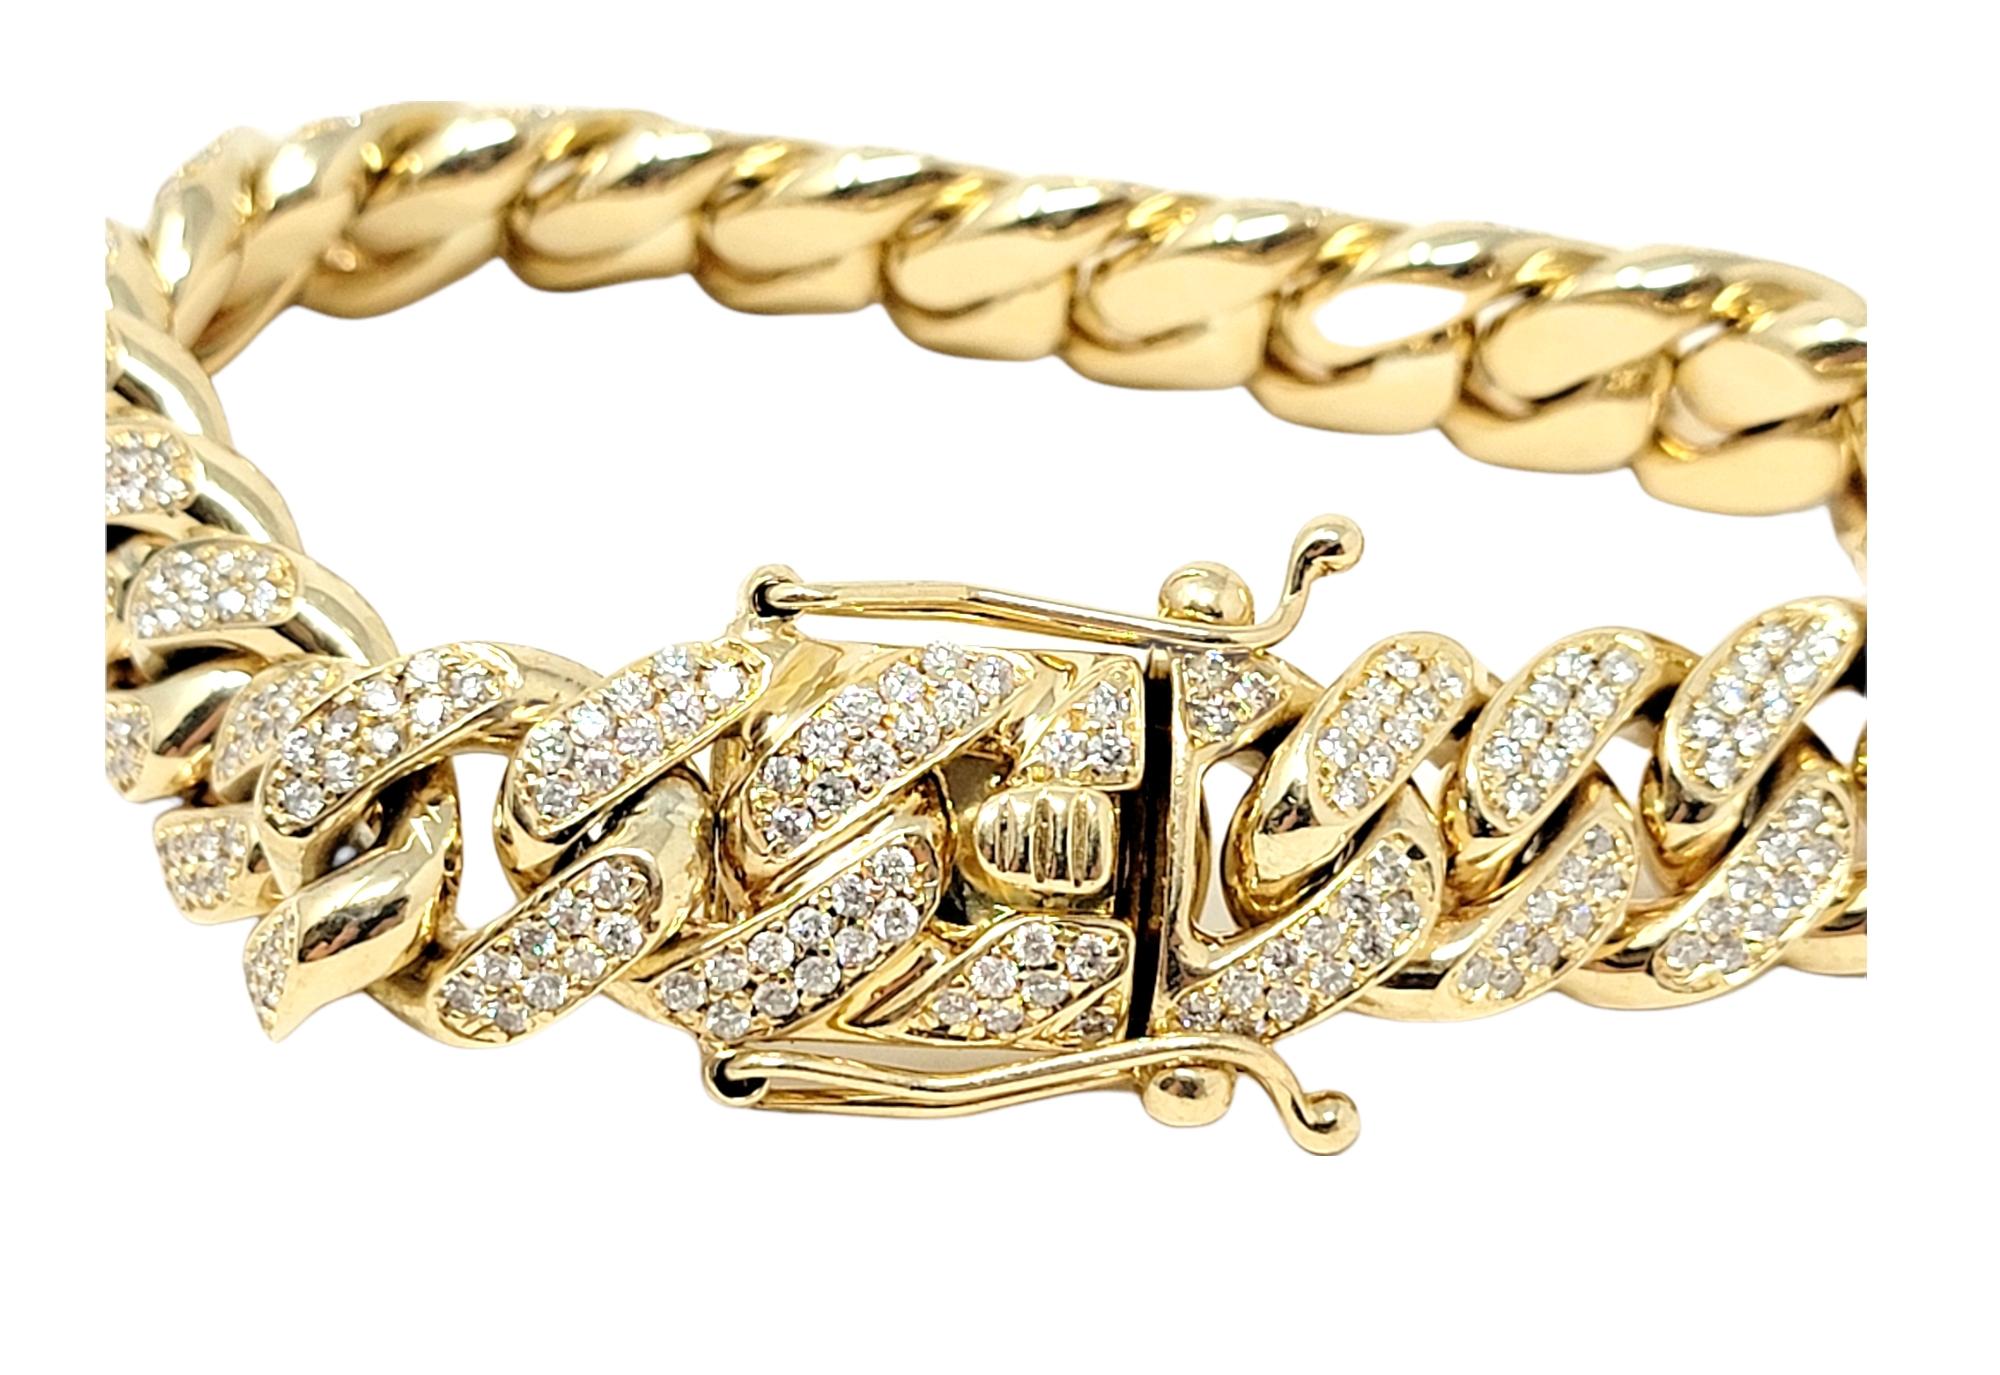 Men's Diamond and 10 Karat Yellow Gold Polished Cuban Link Bracelet 10.15 Carats In Good Condition For Sale In Scottsdale, AZ